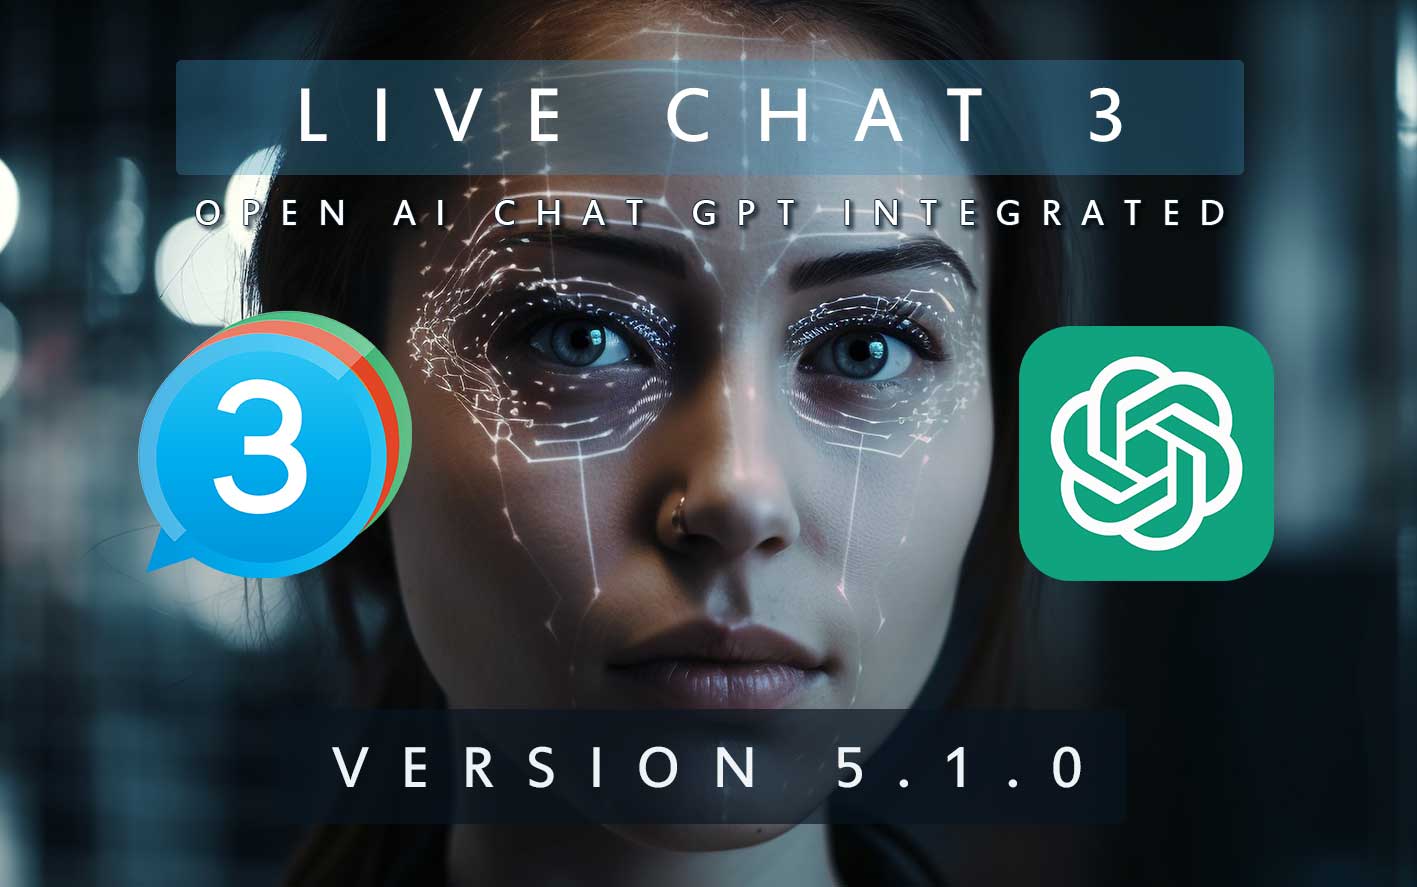 Live Chat 3 - Version 5.1